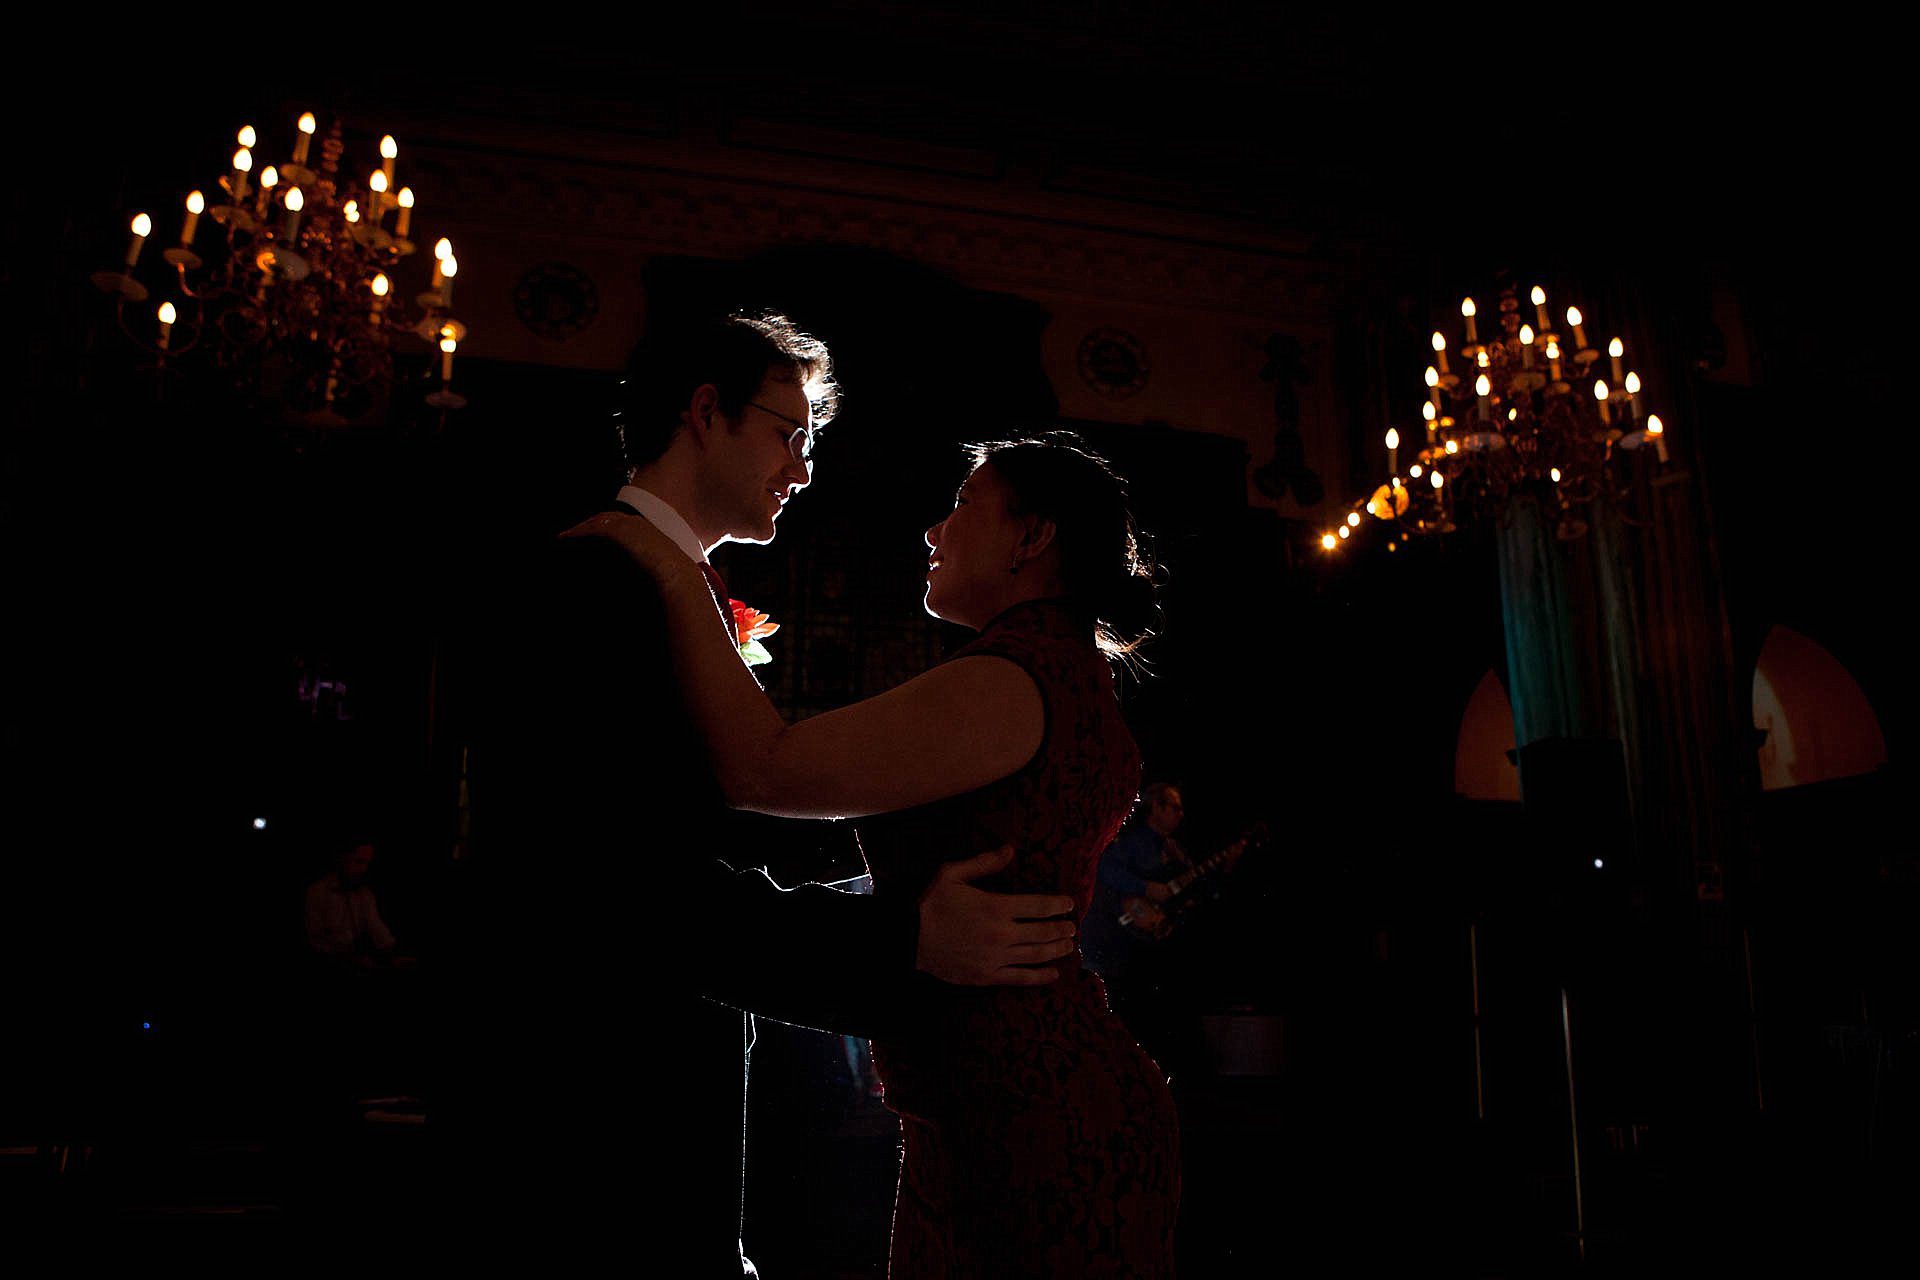 First Dance at The Law Society